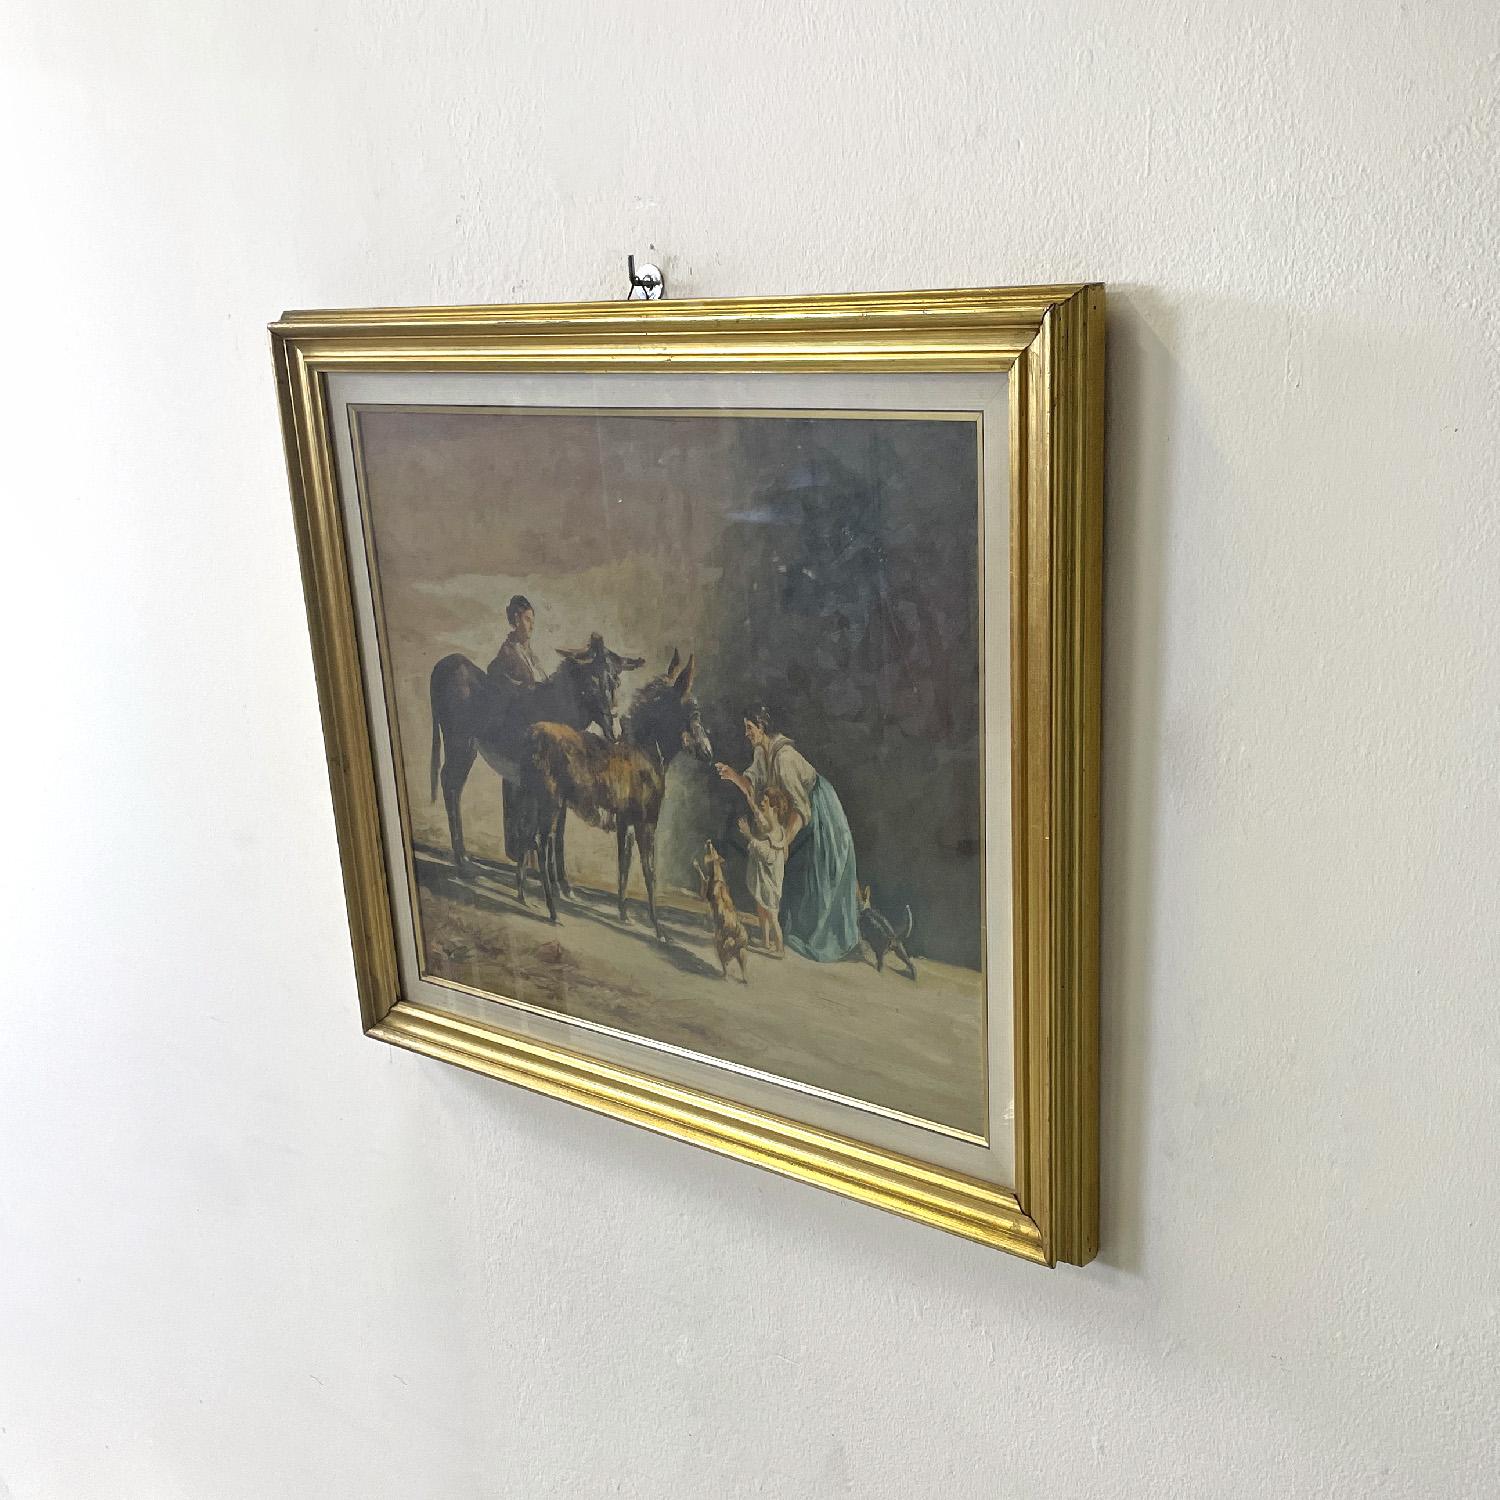 Italian mid-century modern oil painting with donkeys in golden frame, 1960s
Picture with rectangular frame. The painting represents two donkeys accompanied by a girl, another female figure with a child, a dog and a cat in an agricultural setting.